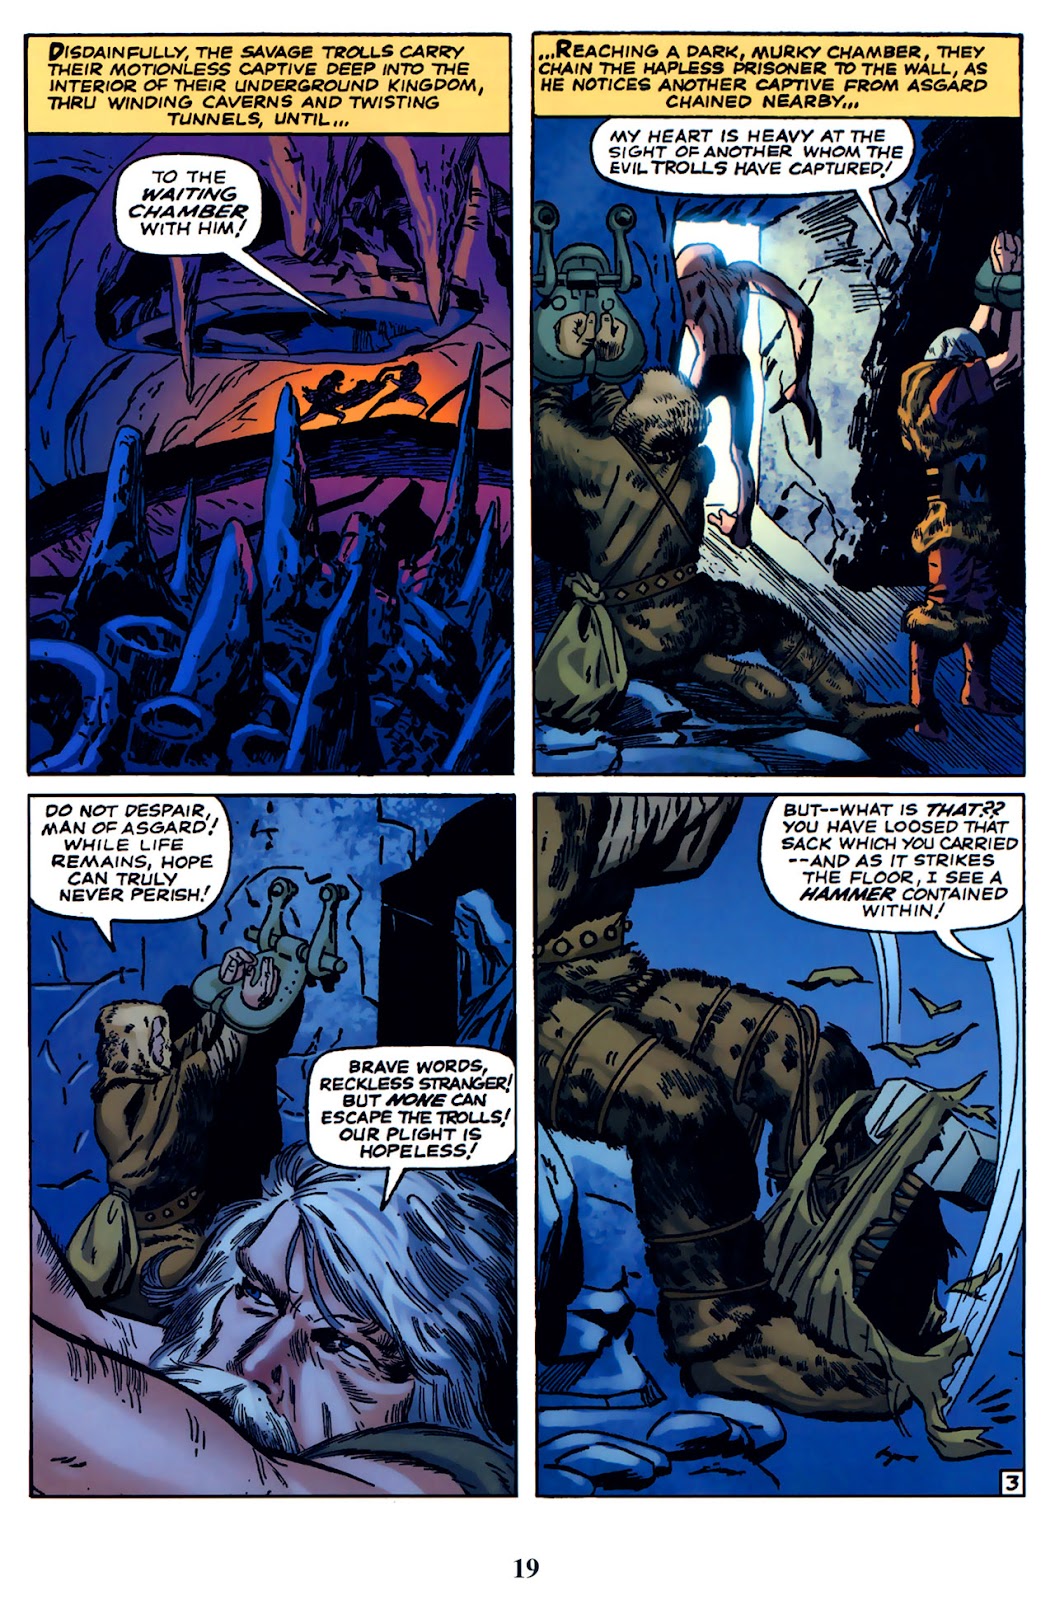 Thor: Tales of Asgard by Stan Lee & Jack Kirby issue 2 - Page 21